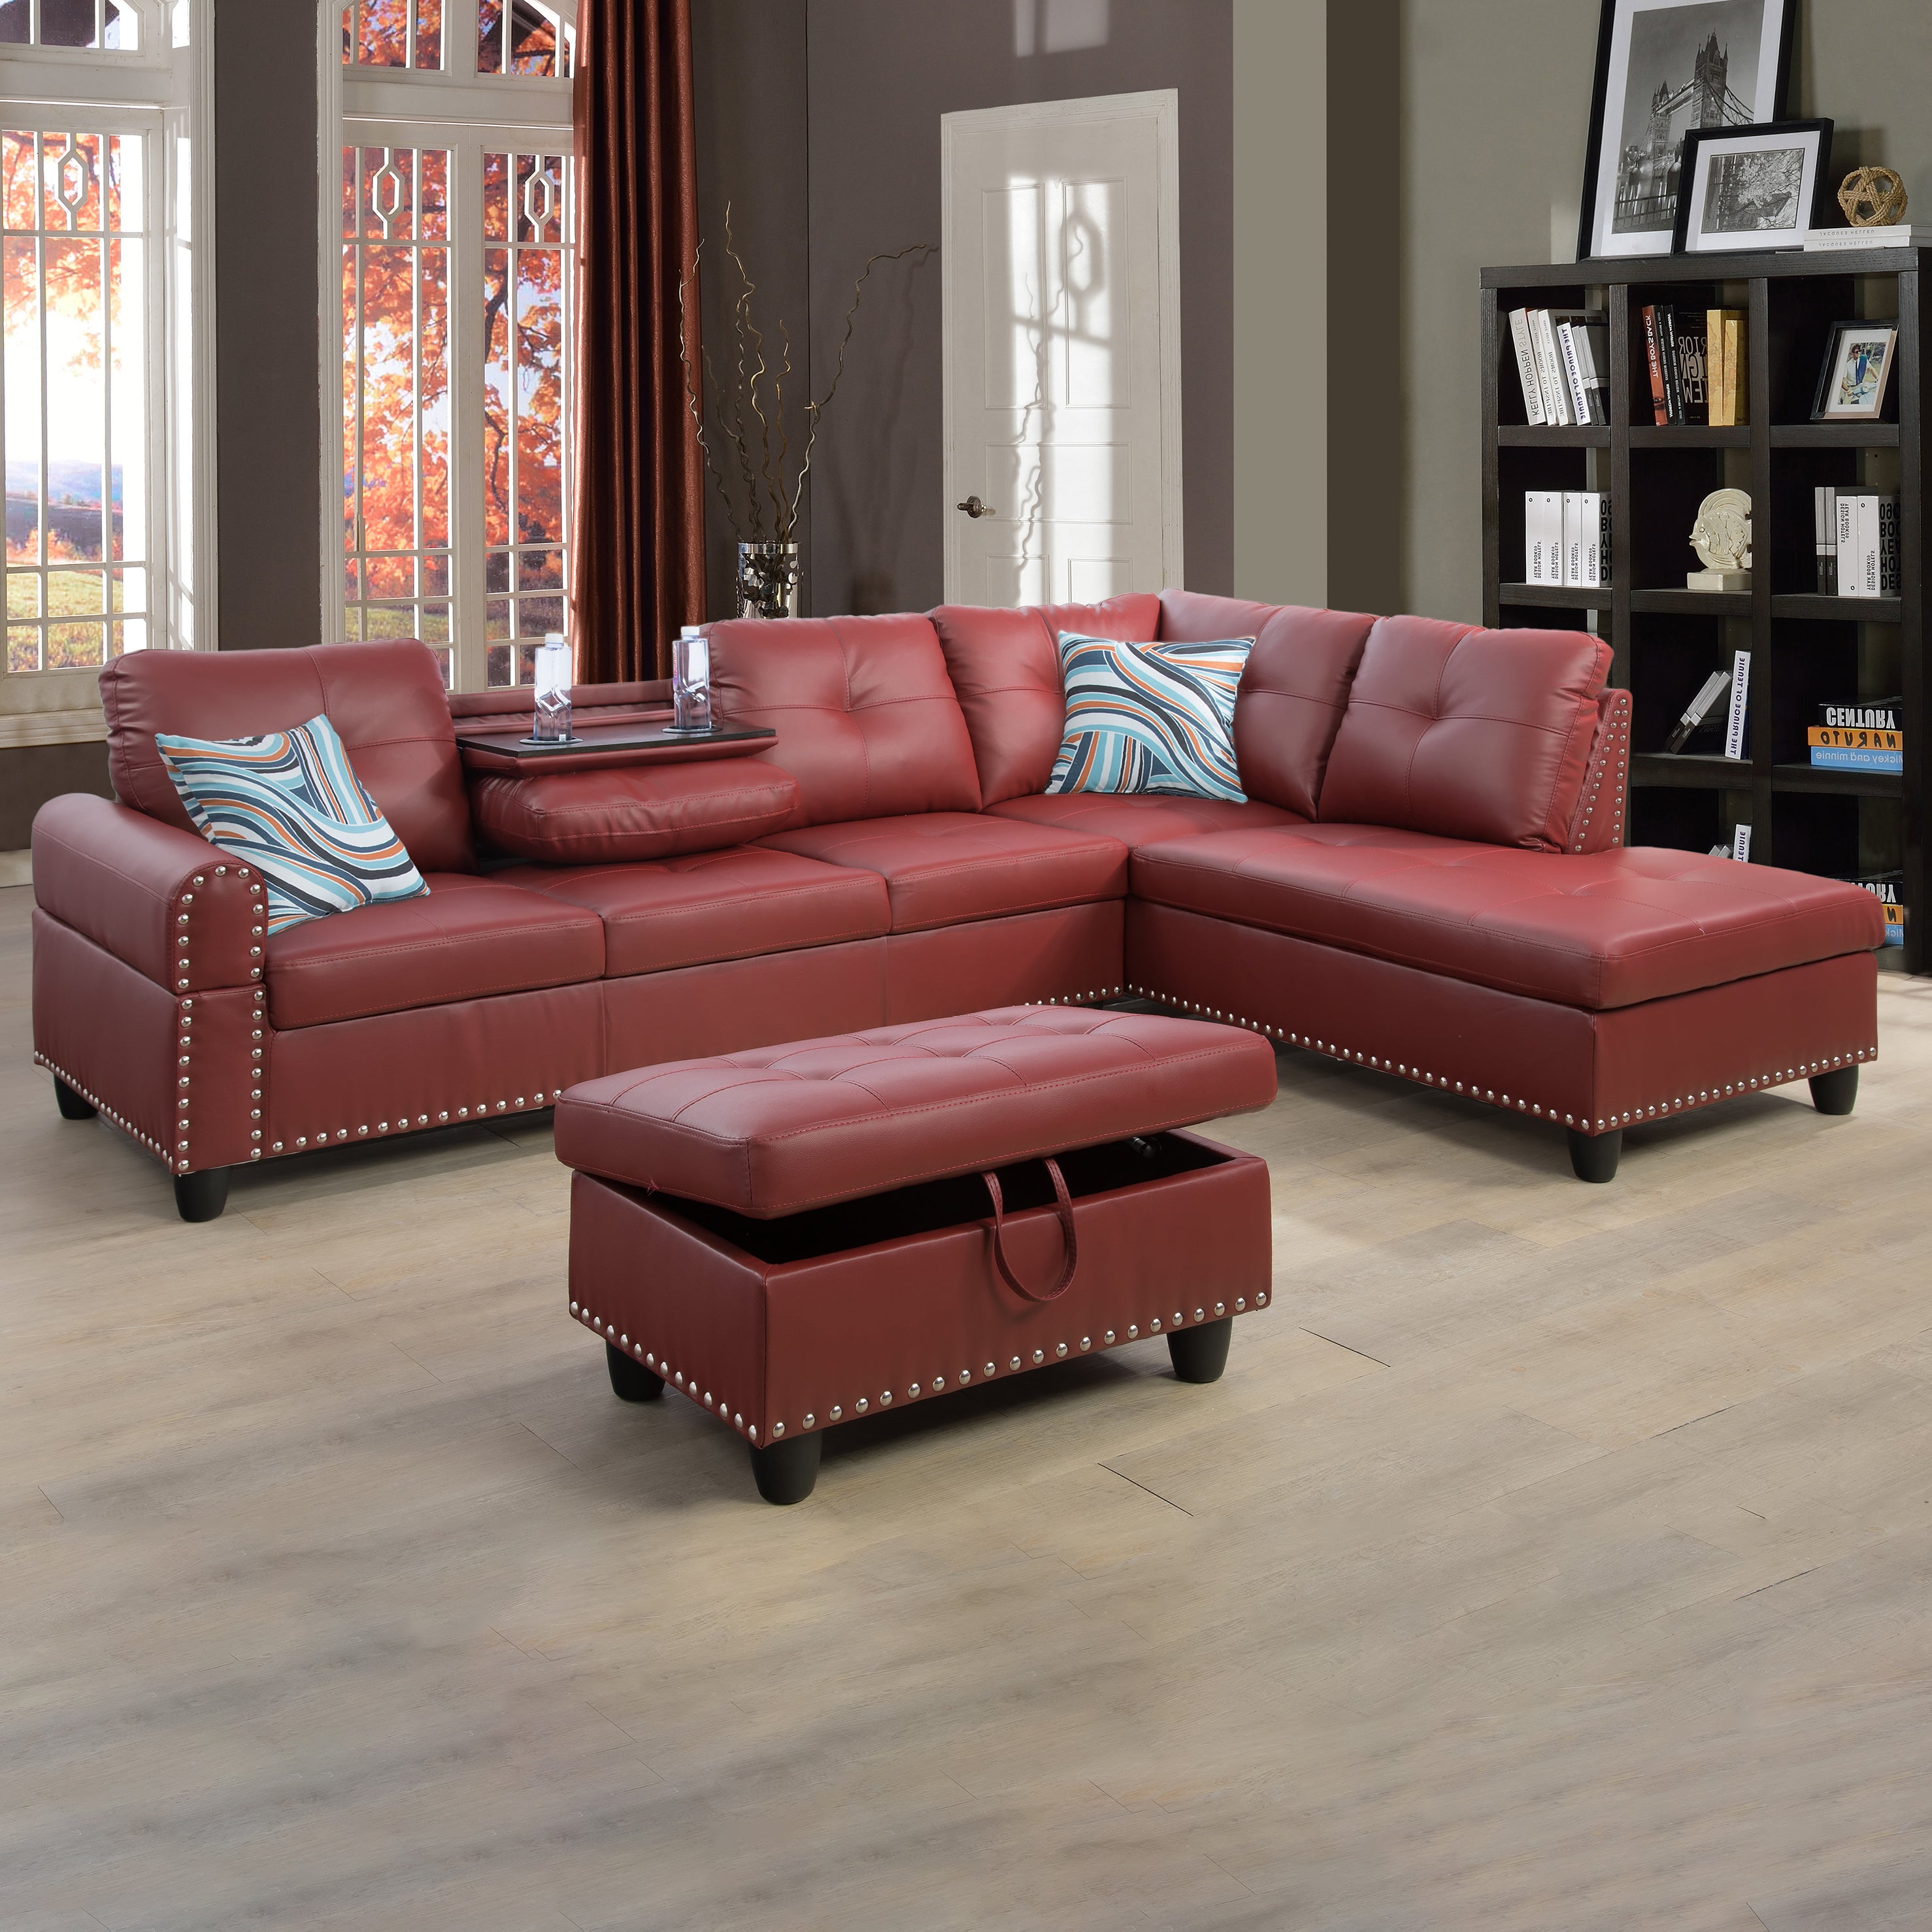 Ainehome Red Faux Leather Synthetic Leather 3-Piece Sofa Set